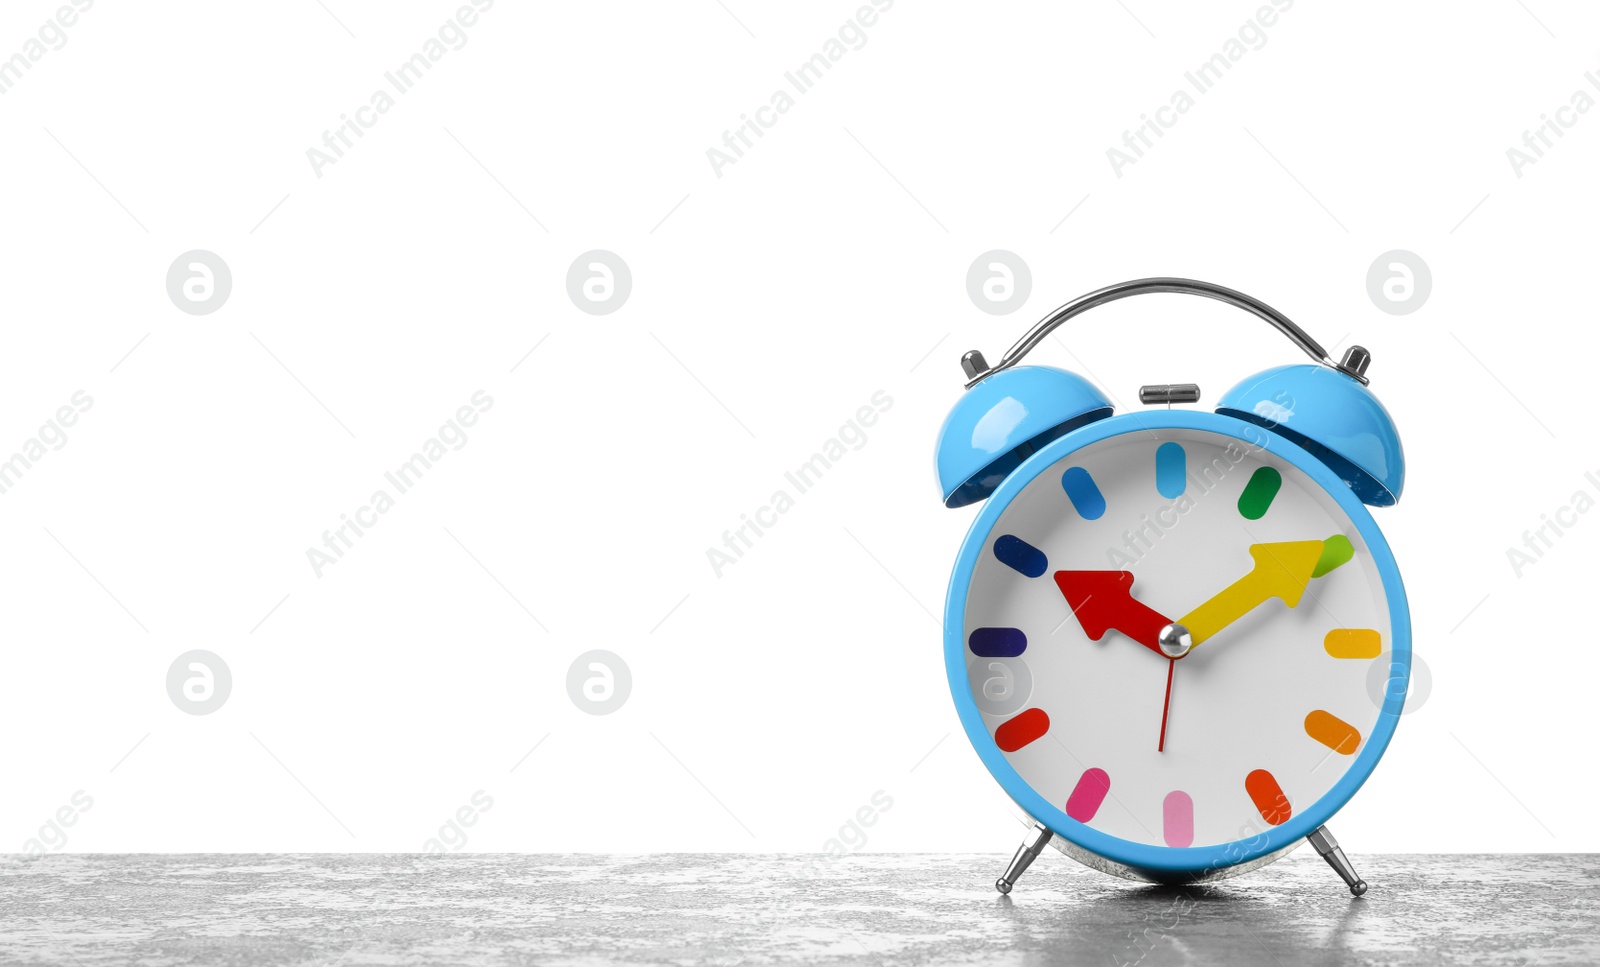 Photo of Alarm clock on table against white background. Time concept